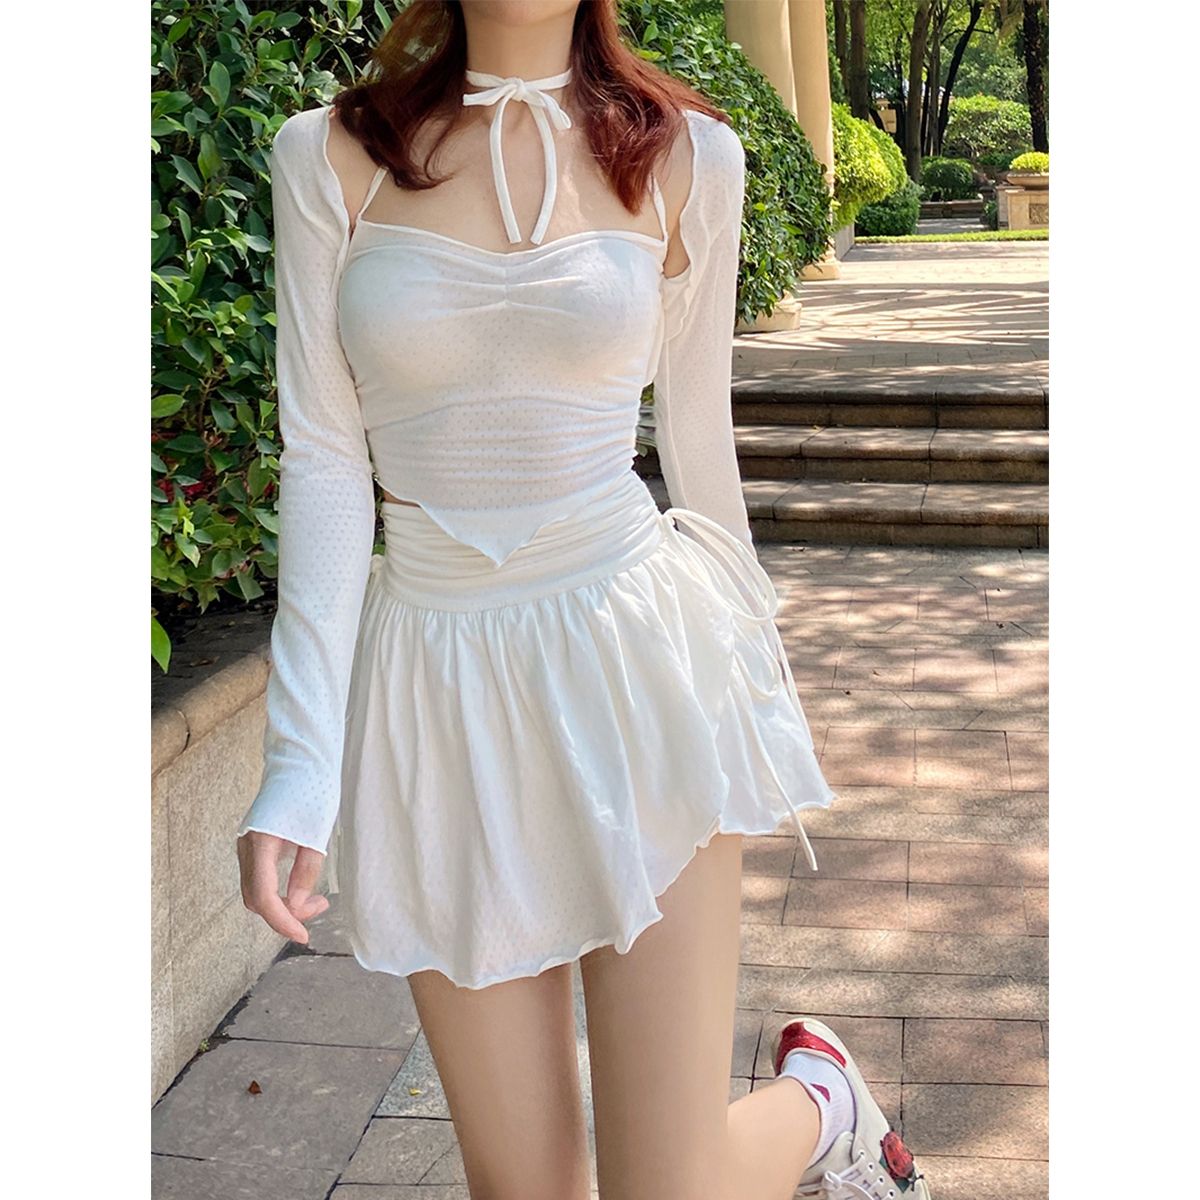 Pure lust-style white skirt for women, stylish drawstring pleated A-line short culottes, high-waisted anti-exposure irregular skirt